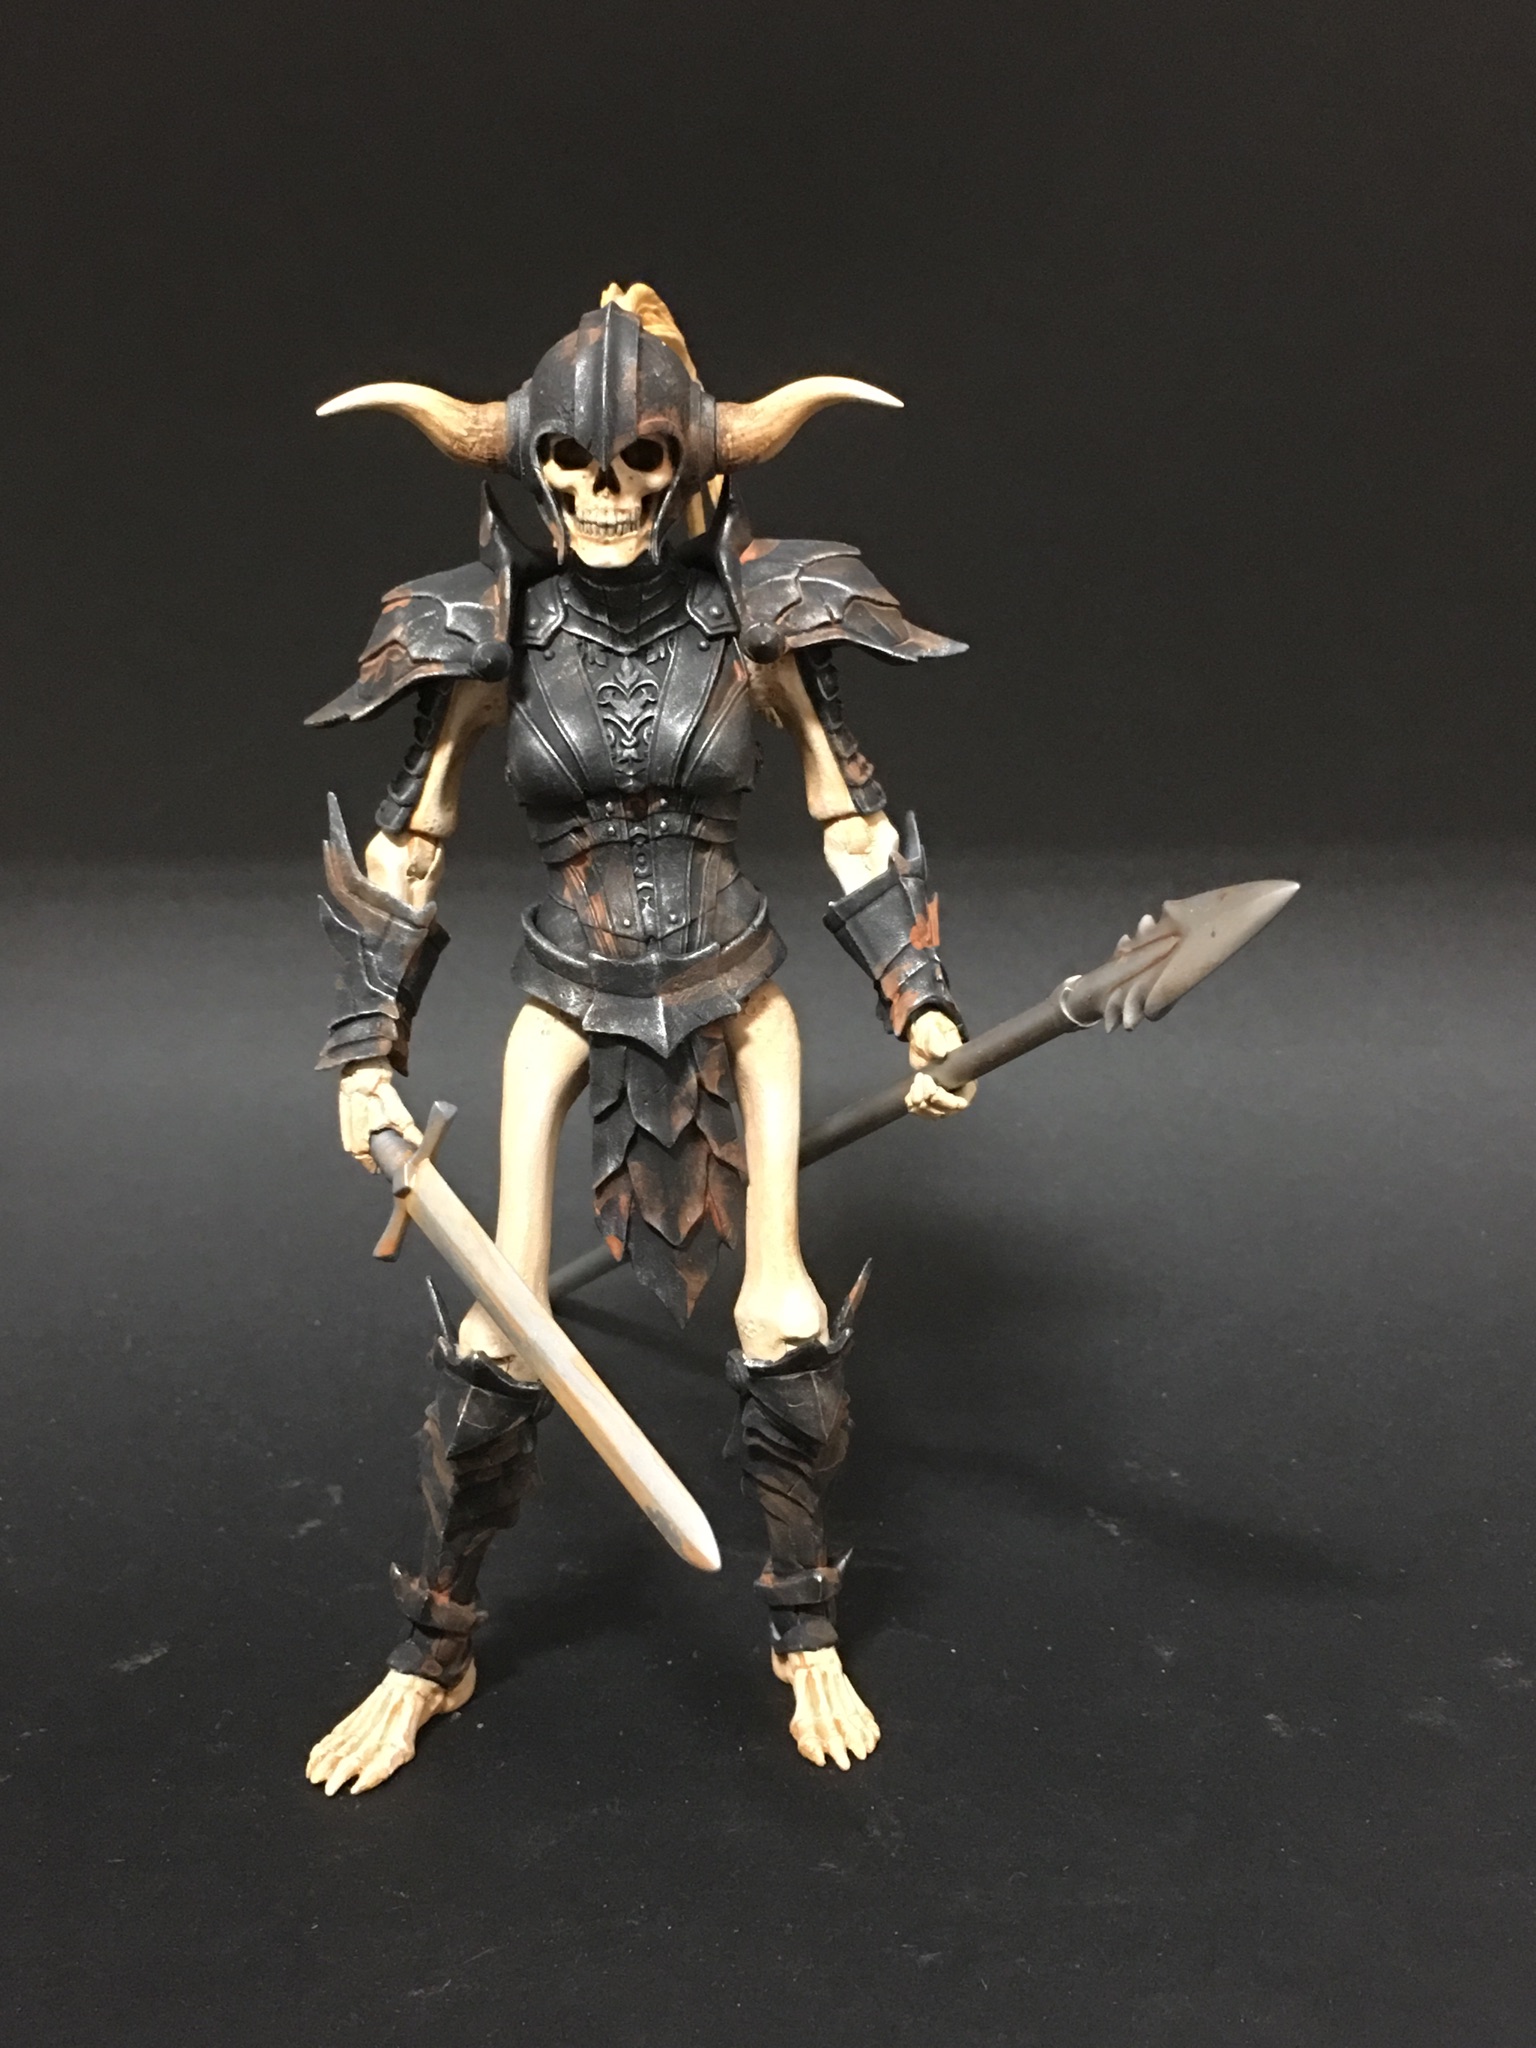 Skeleton Soldier - Mythic Legions action figure from Four Horsemen